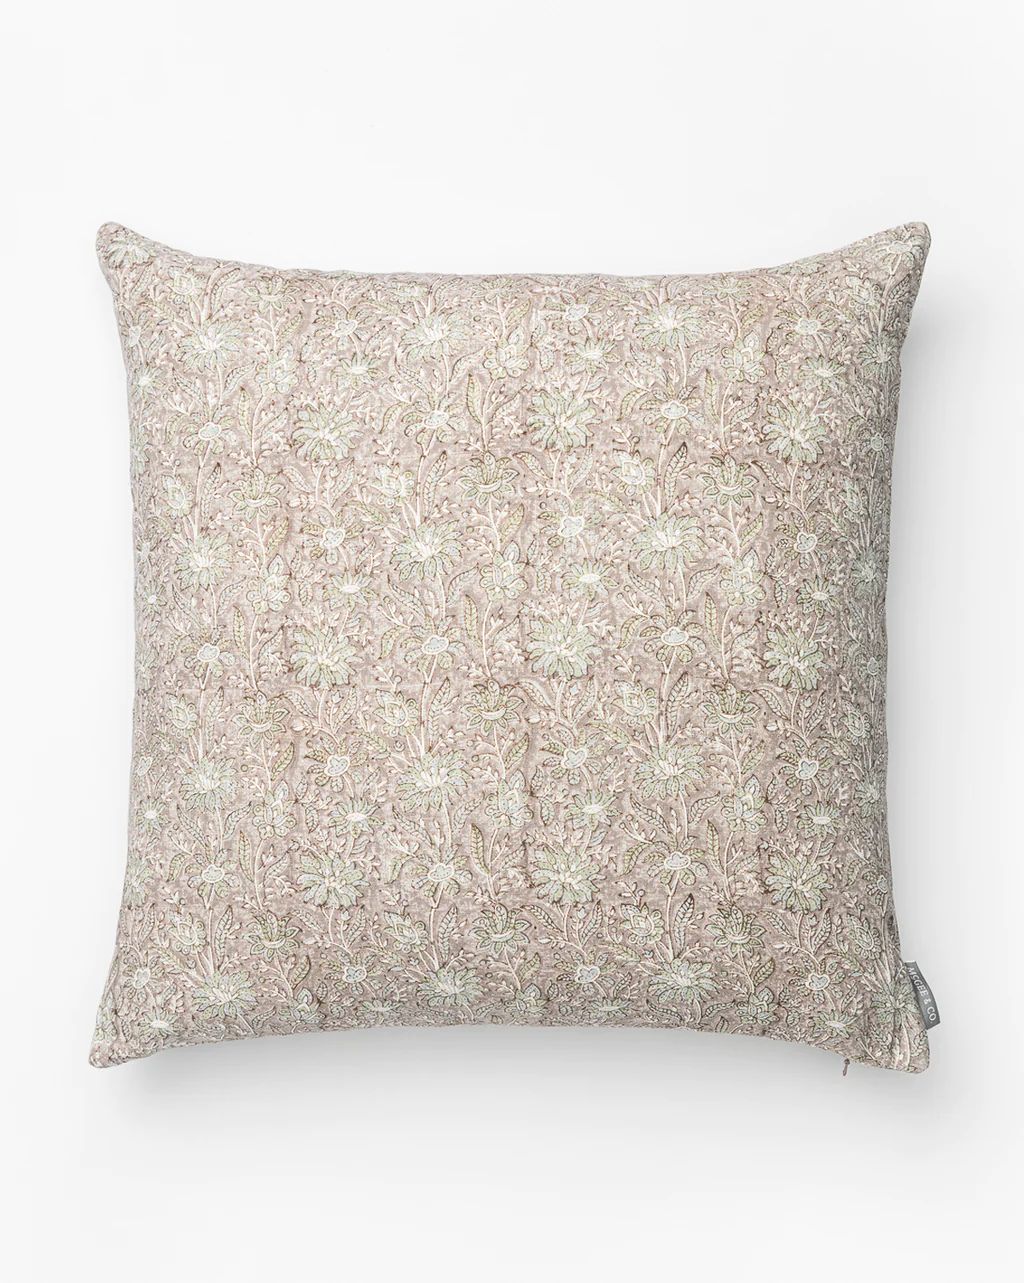 Opal Pillow Cover | McGee & Co.